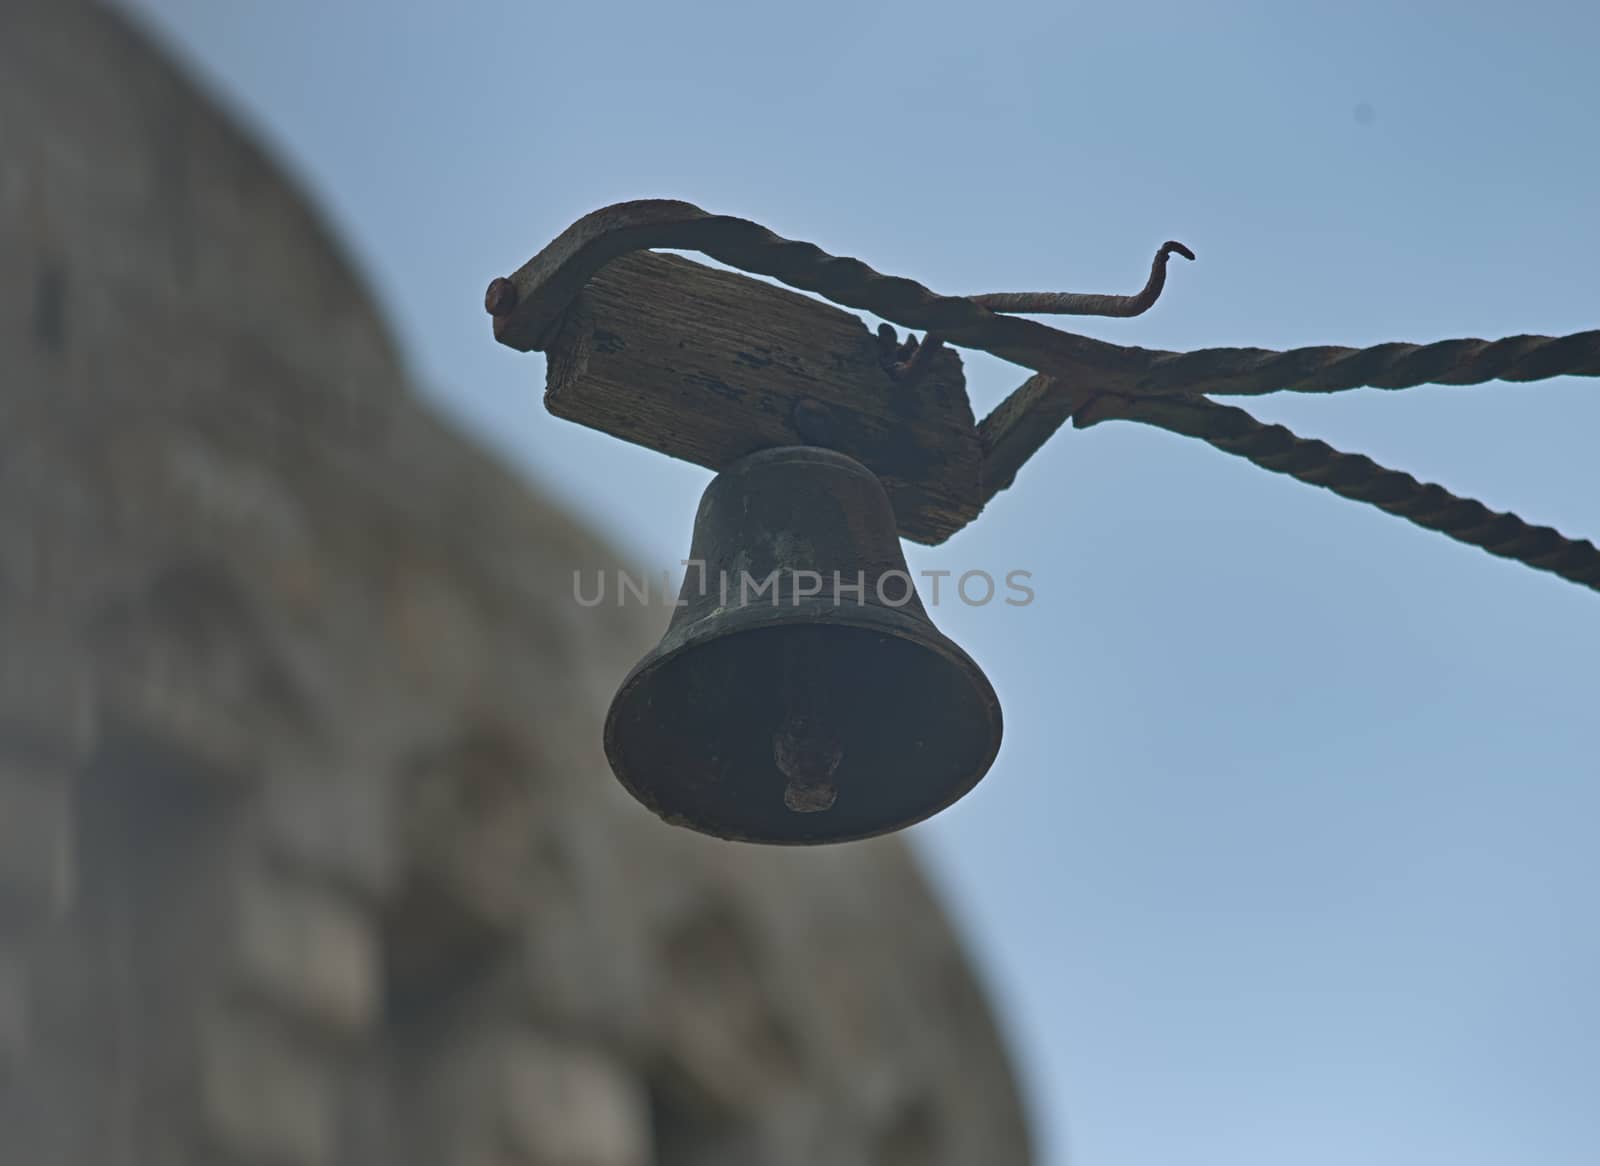 Small black bell hanging and sky and stone fortress in background